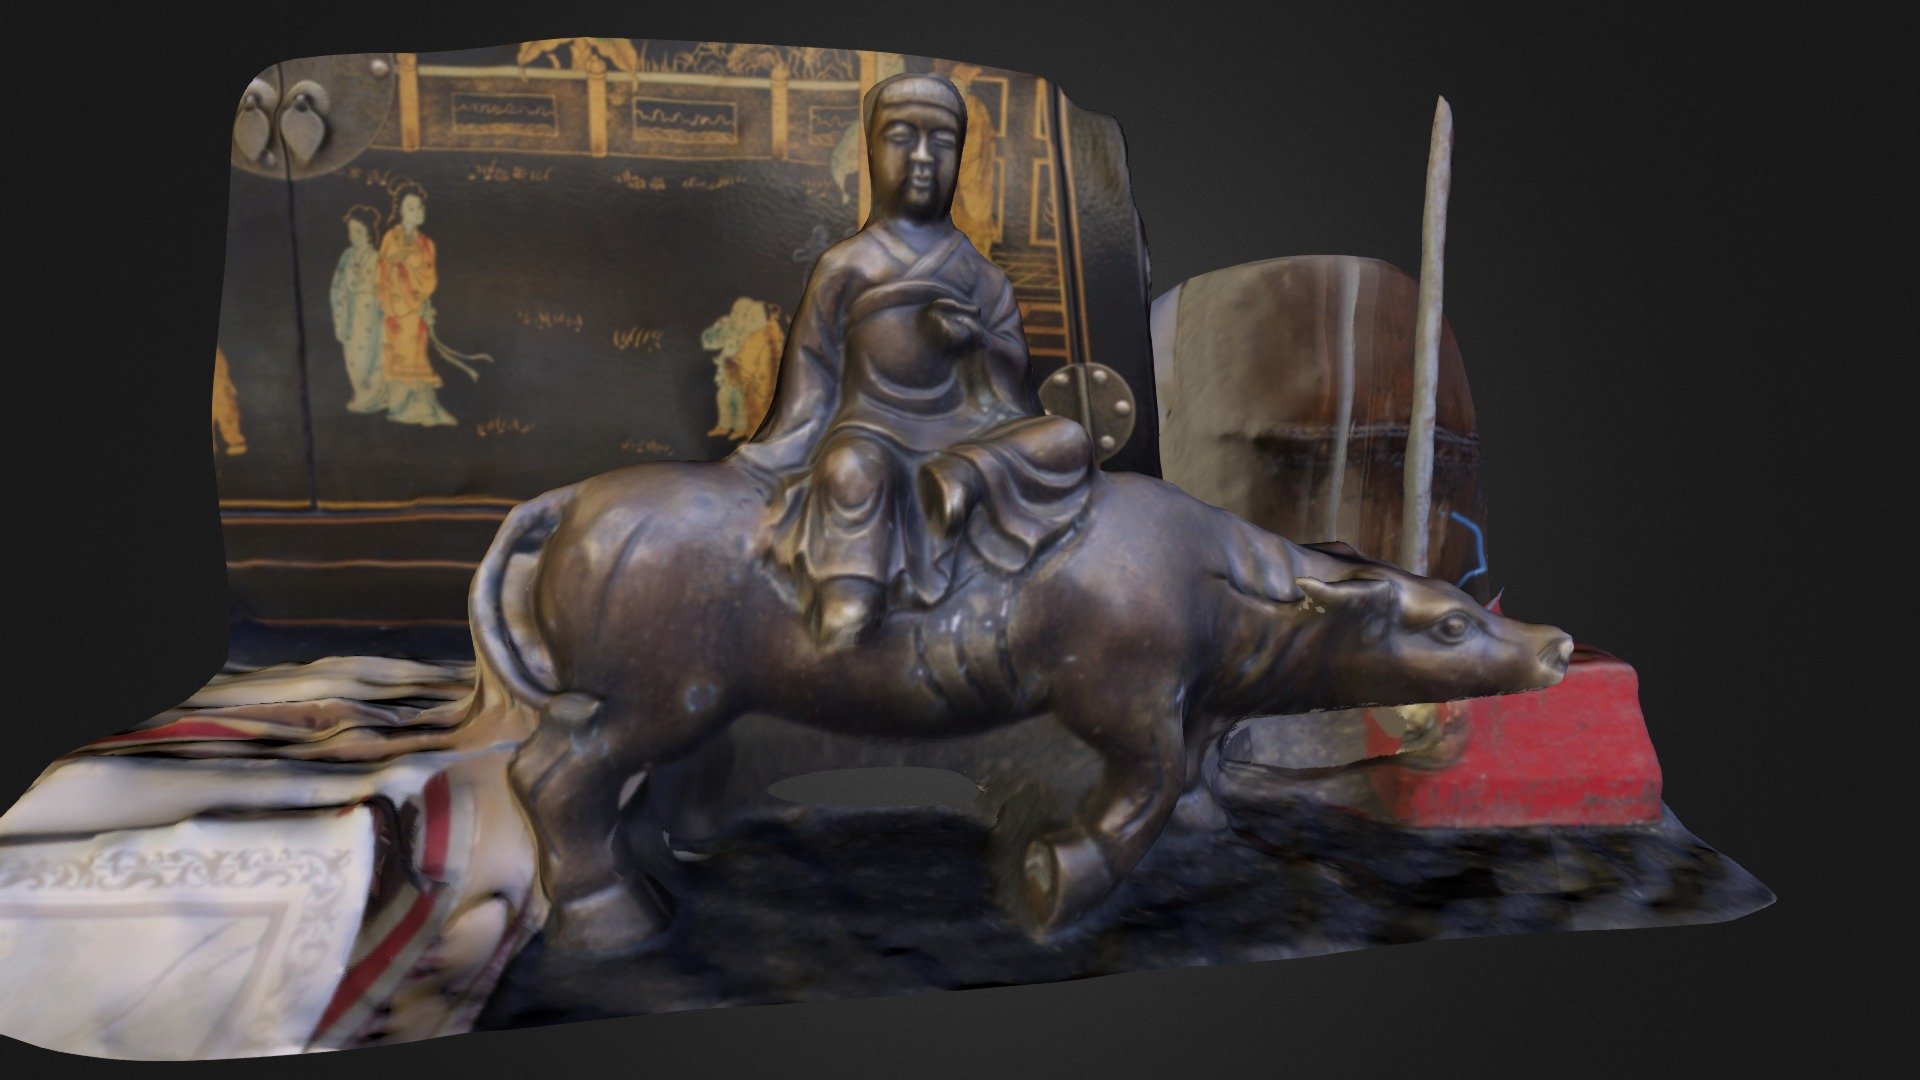 Chinese statue (123d catch)